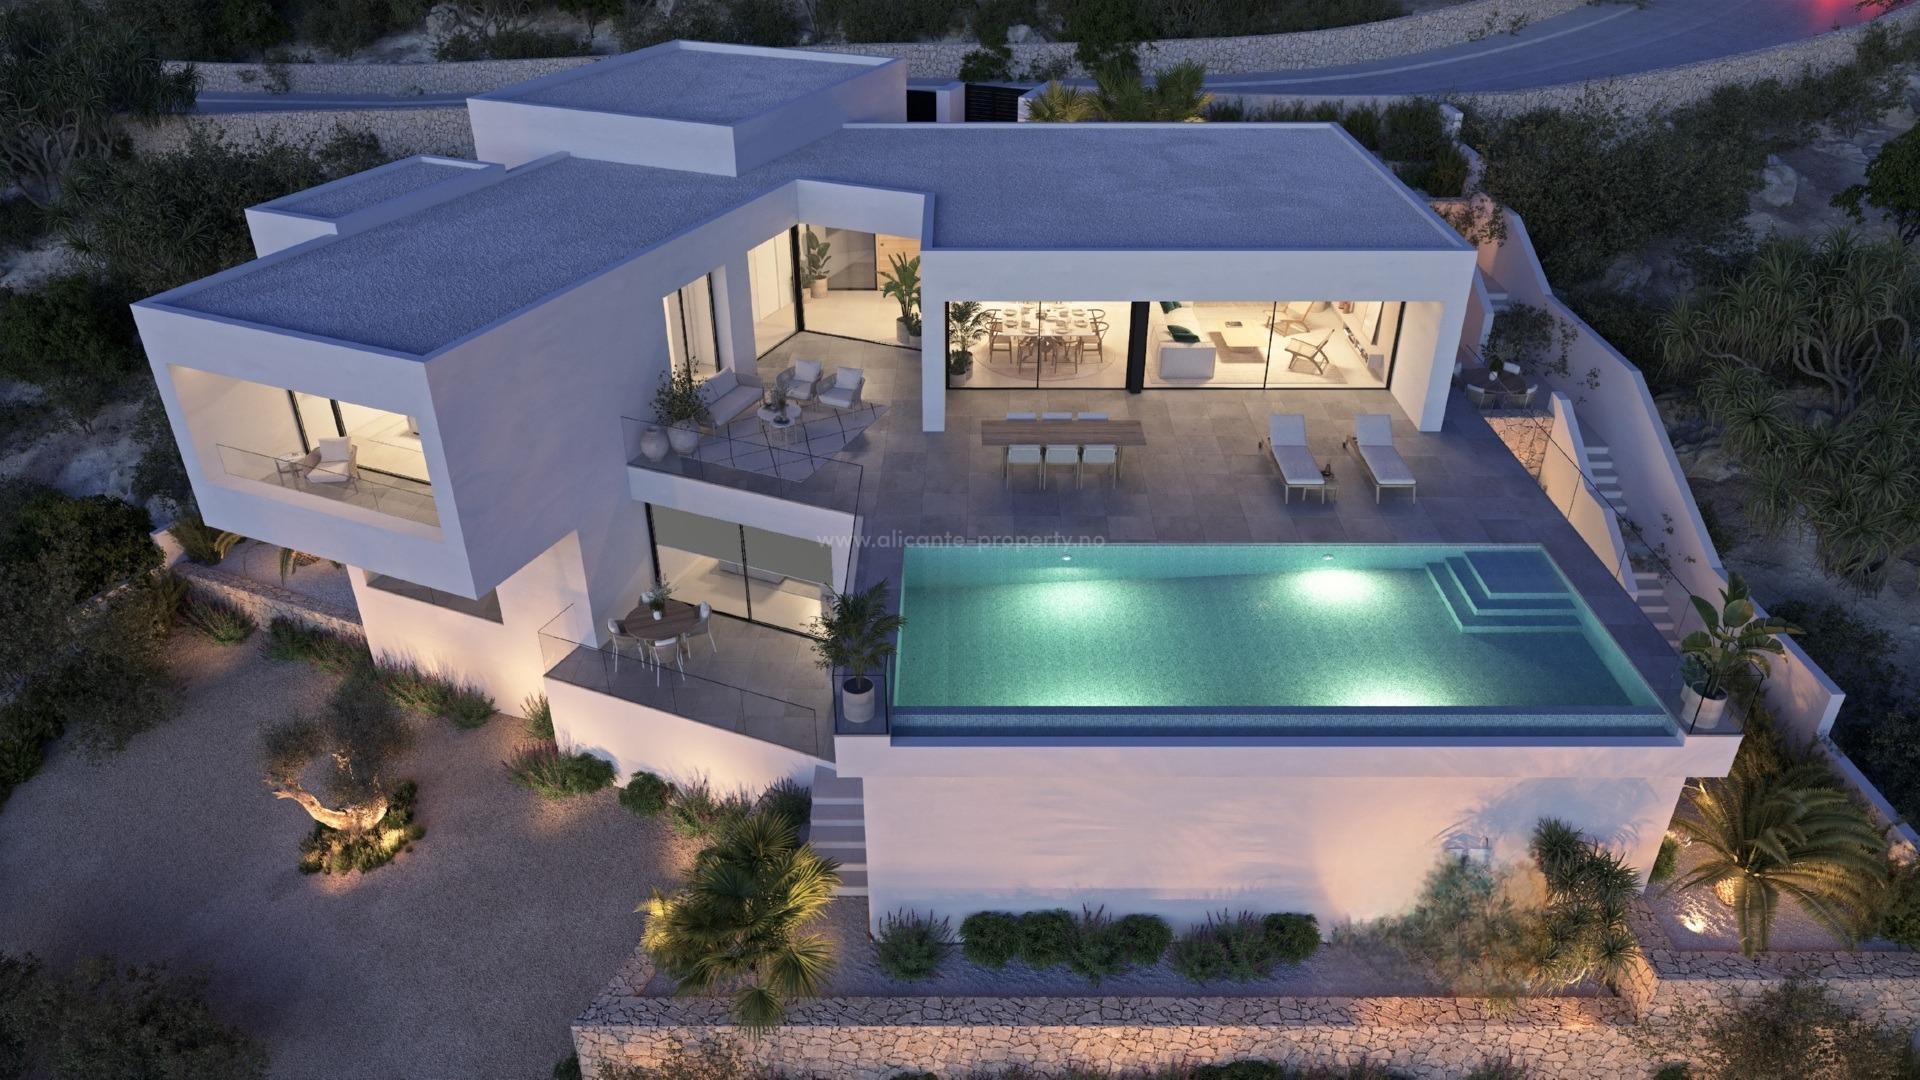 Luxury villa in Cumbra del Sol near Benitechell, 3 bedrooms, 4 bathrooms, incredible views, the terrace is crowned by an infinity pool overlooking the Mediterranean